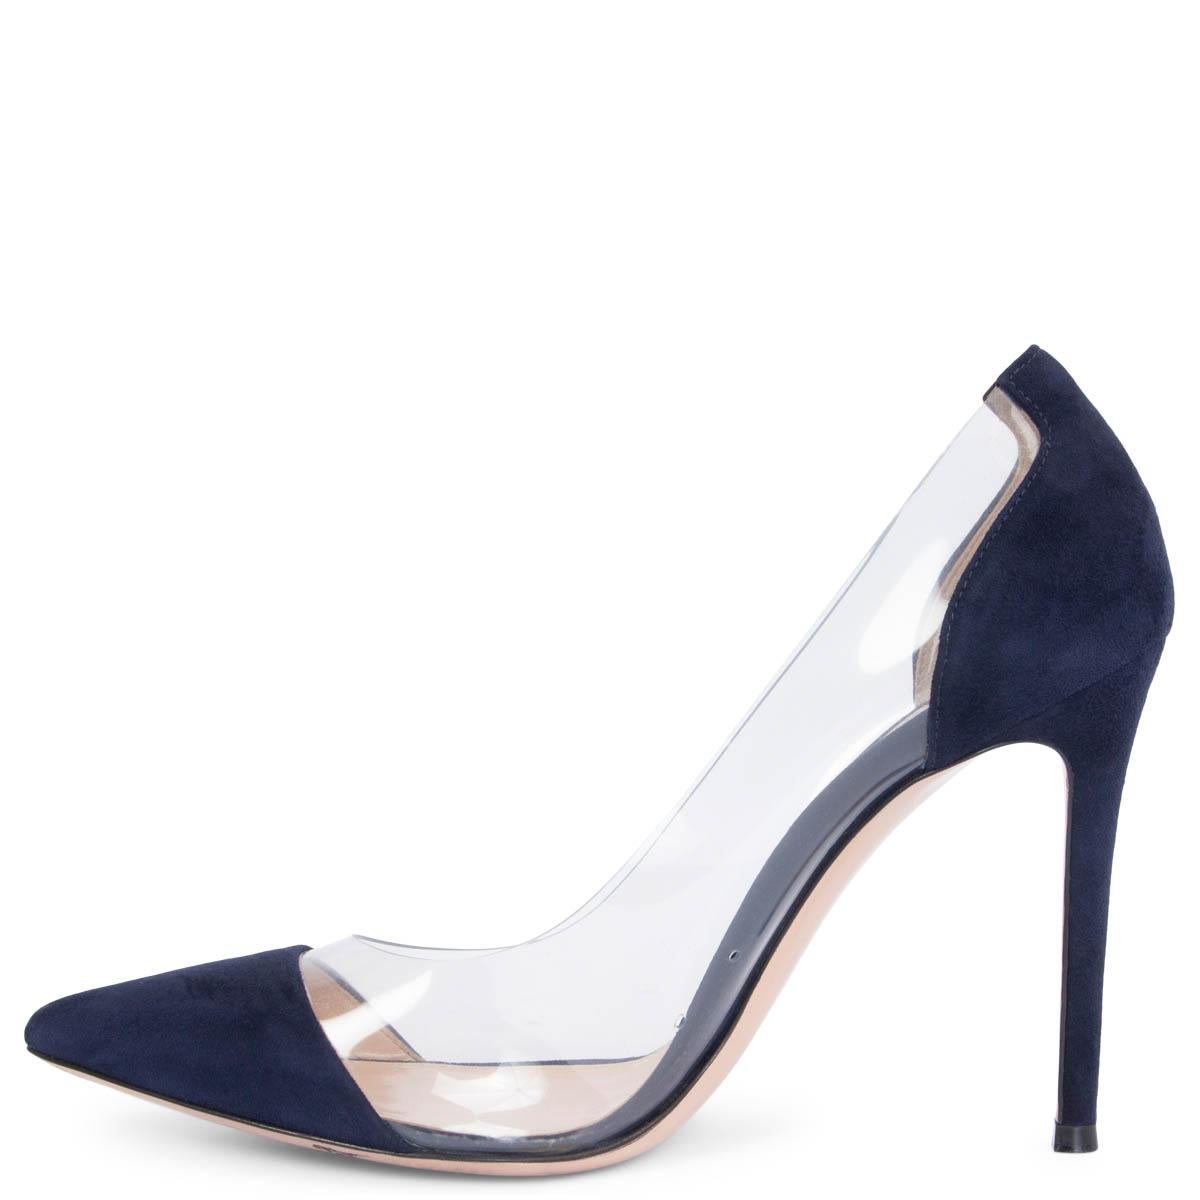 Gray GIANVITO ROSSI navy blue suede PLEXI 105 Pumps Shoes 37 For Sale